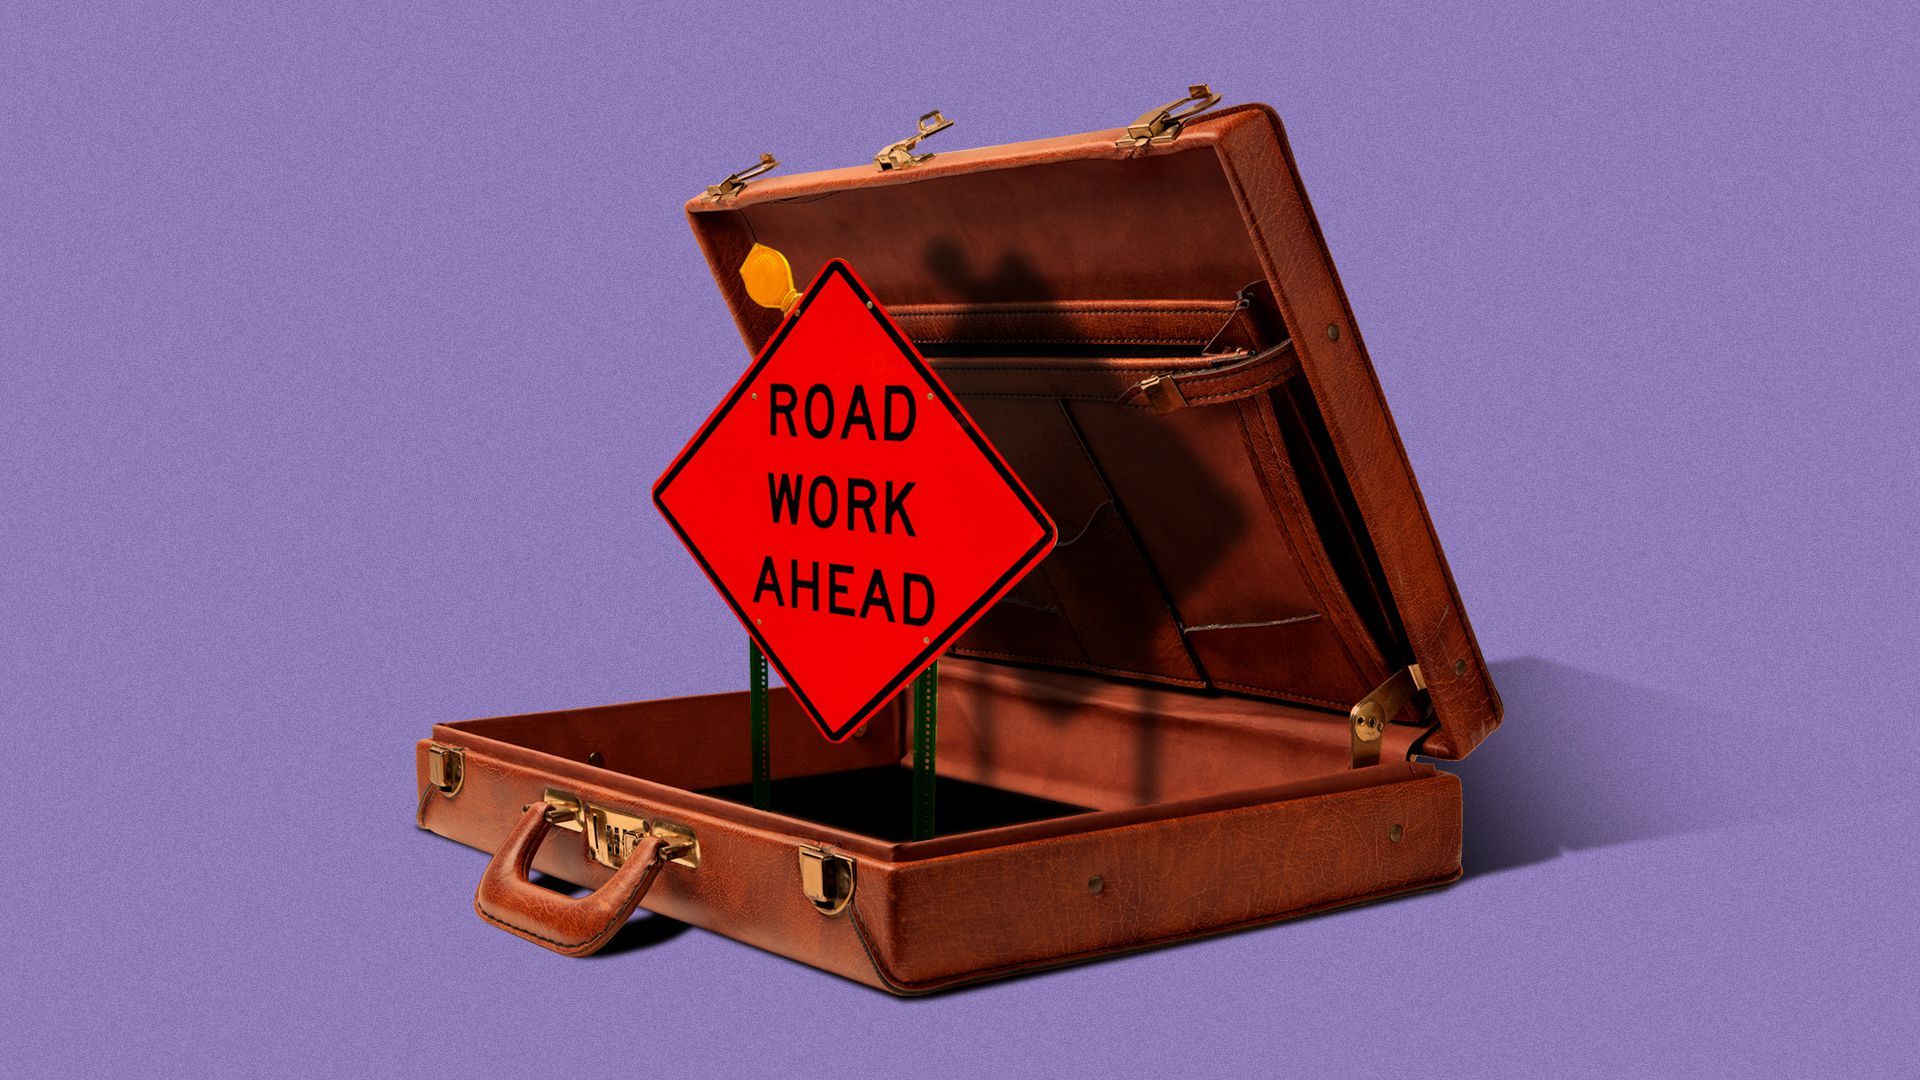 Illustration of an open briefcase with a "road work ahead" sign